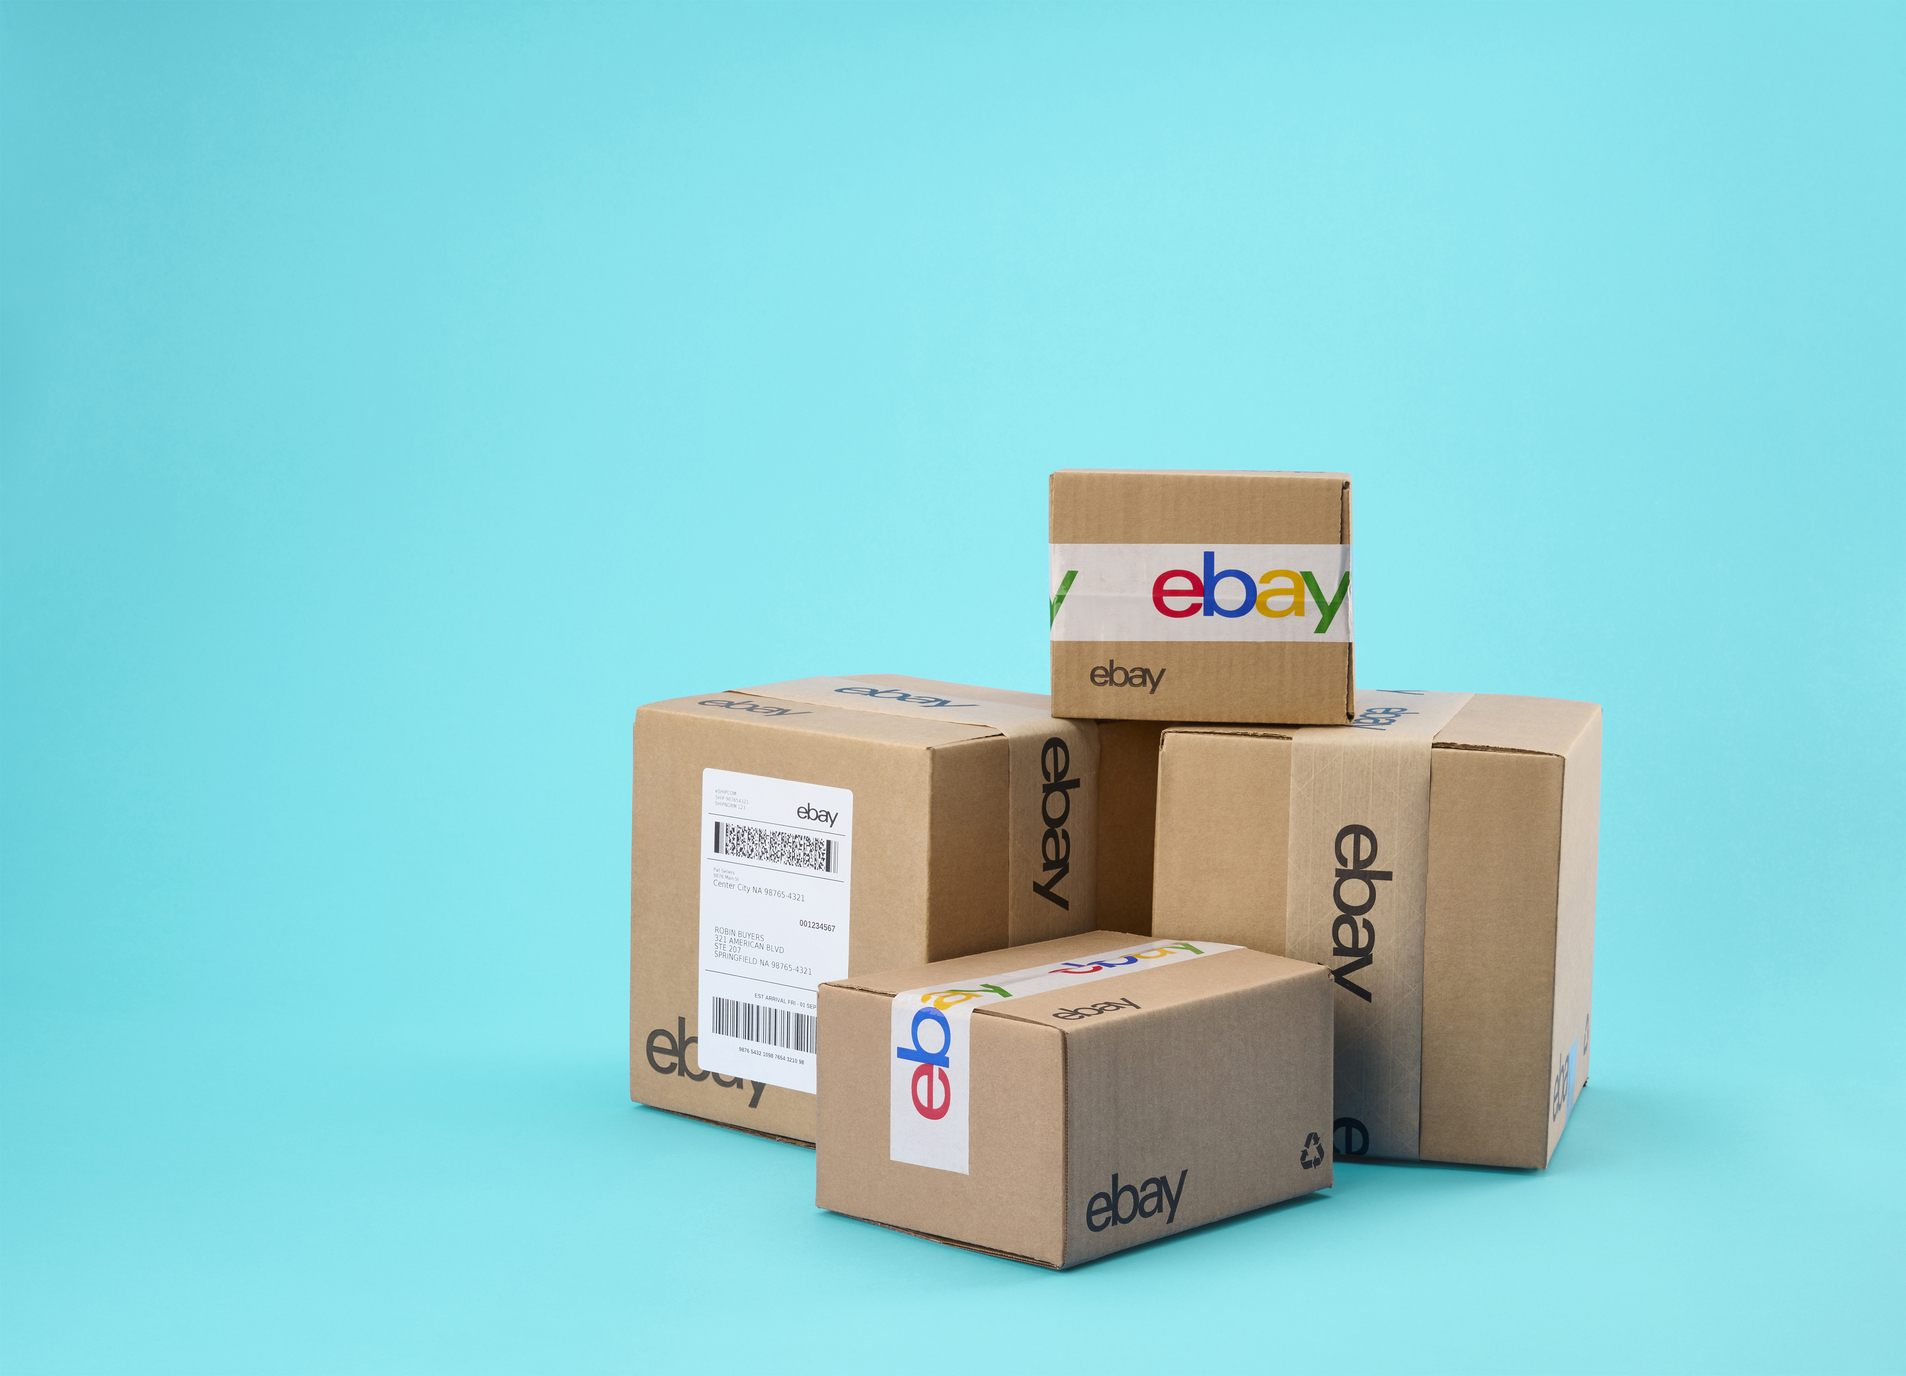 pile of boxes with eBay packaging against a blue background